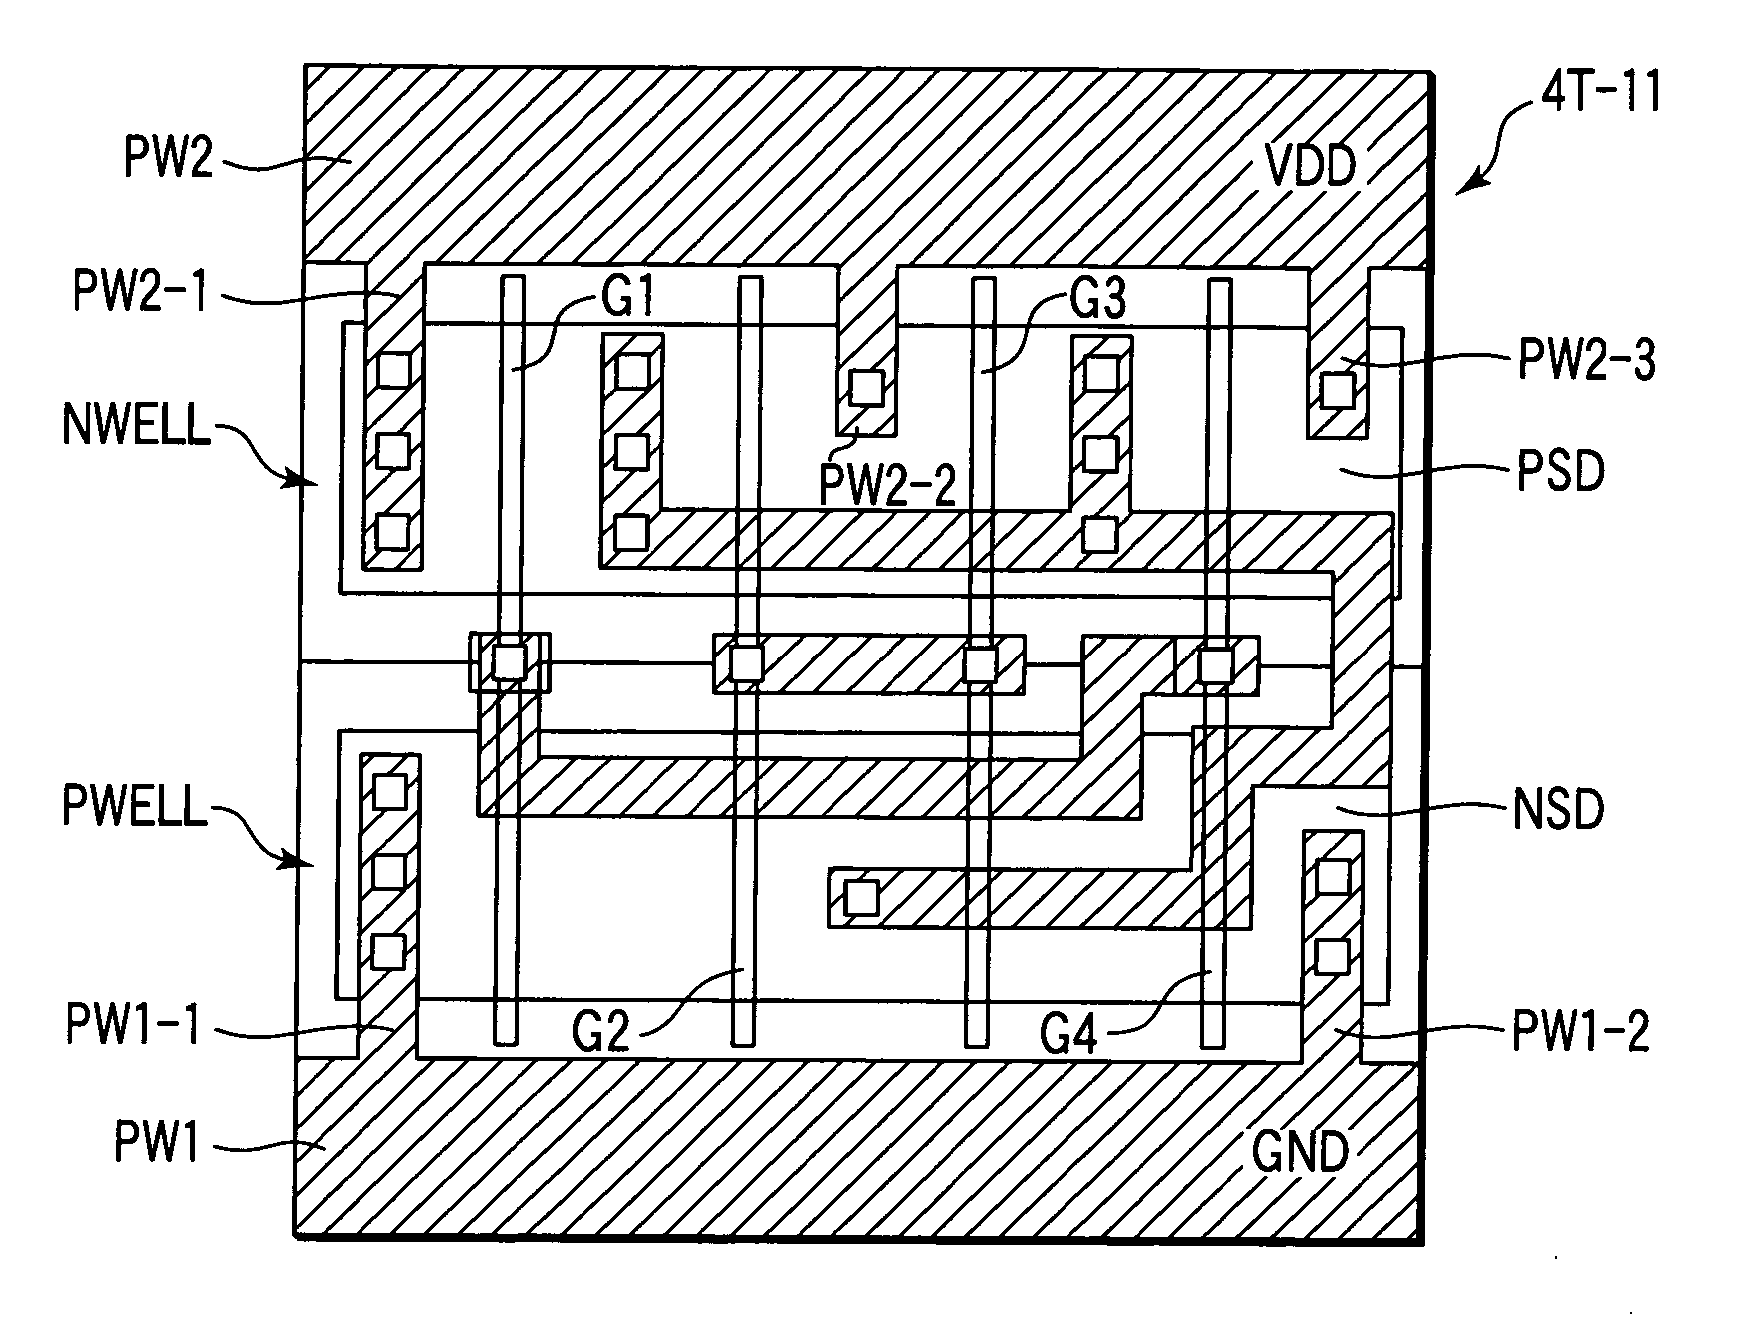 Semiconductor integrated circuit device formed by automatic layout wiring by use of standard cells and design method of fixing its well potential